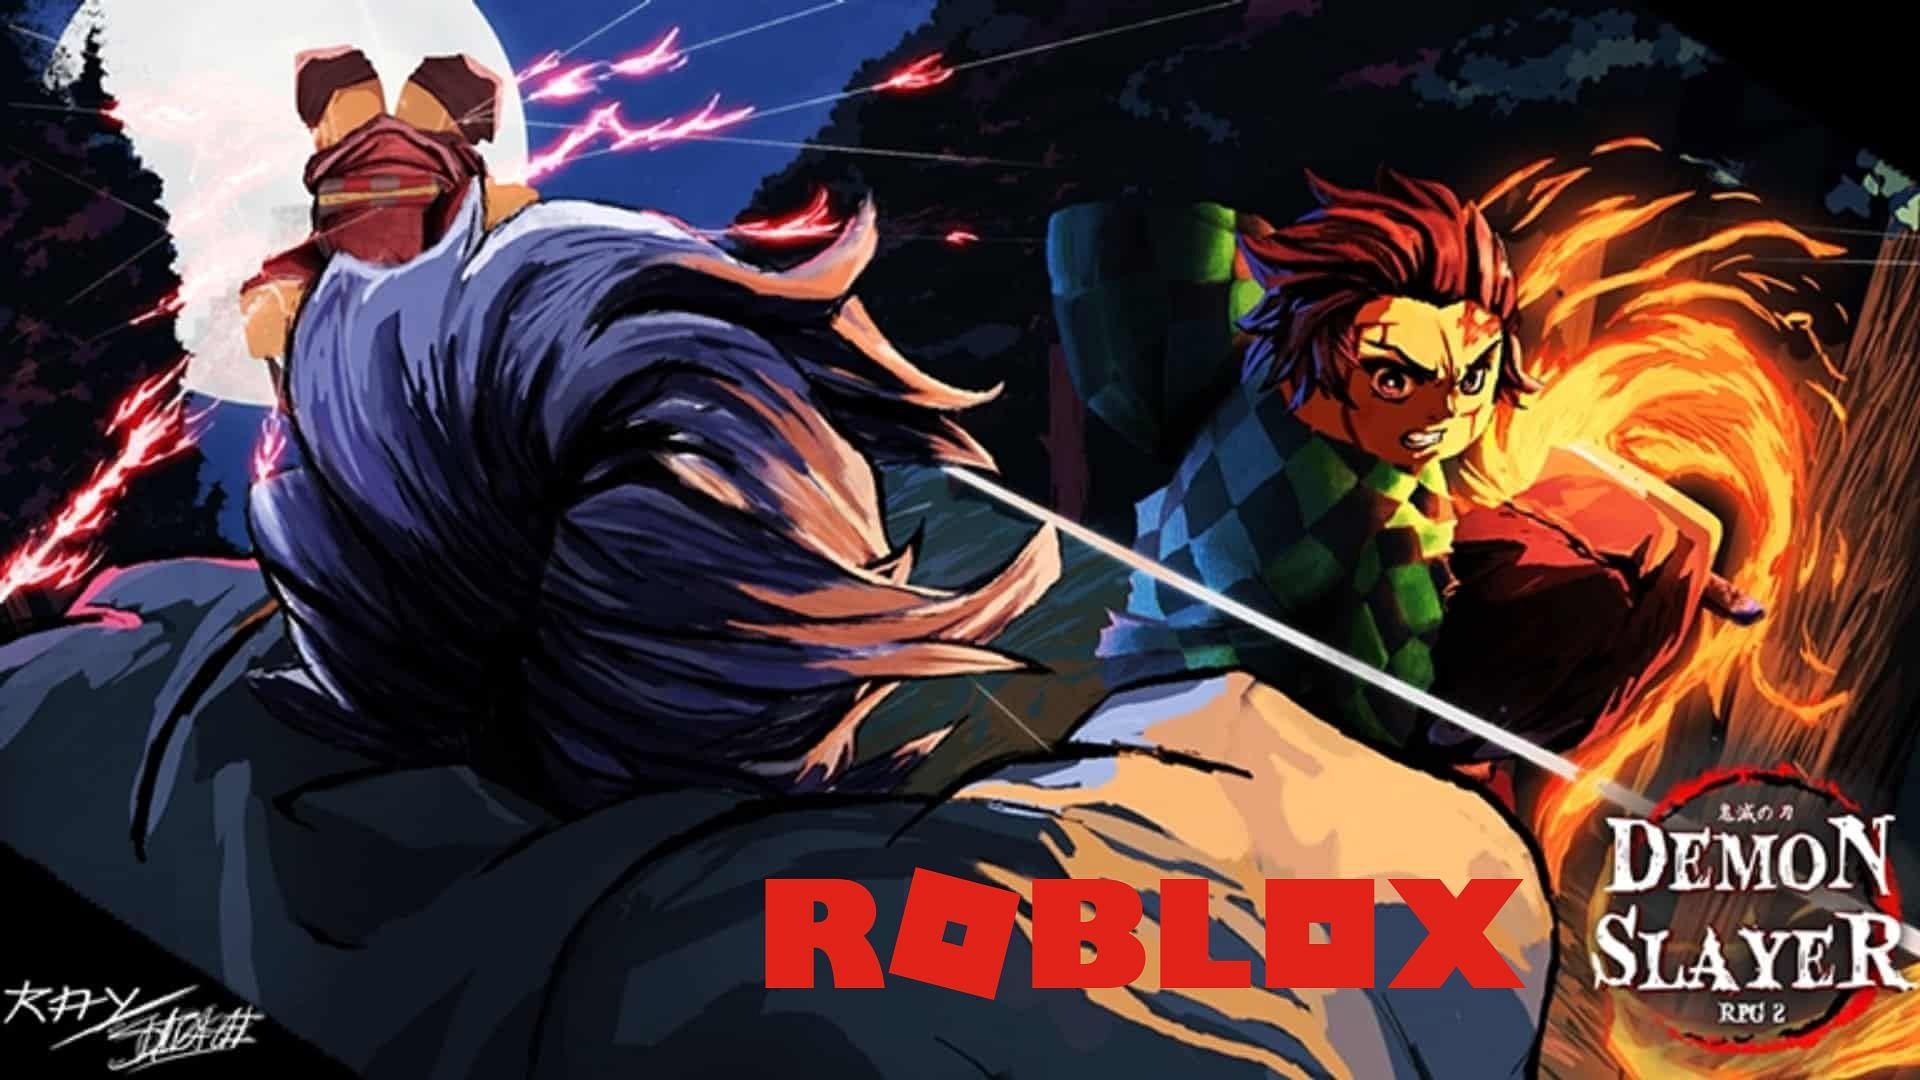 ALL DEMON SLAYER RPG 2 CODES! (May 2021)  ROBLOX Codes *SECRET/WORKING* 